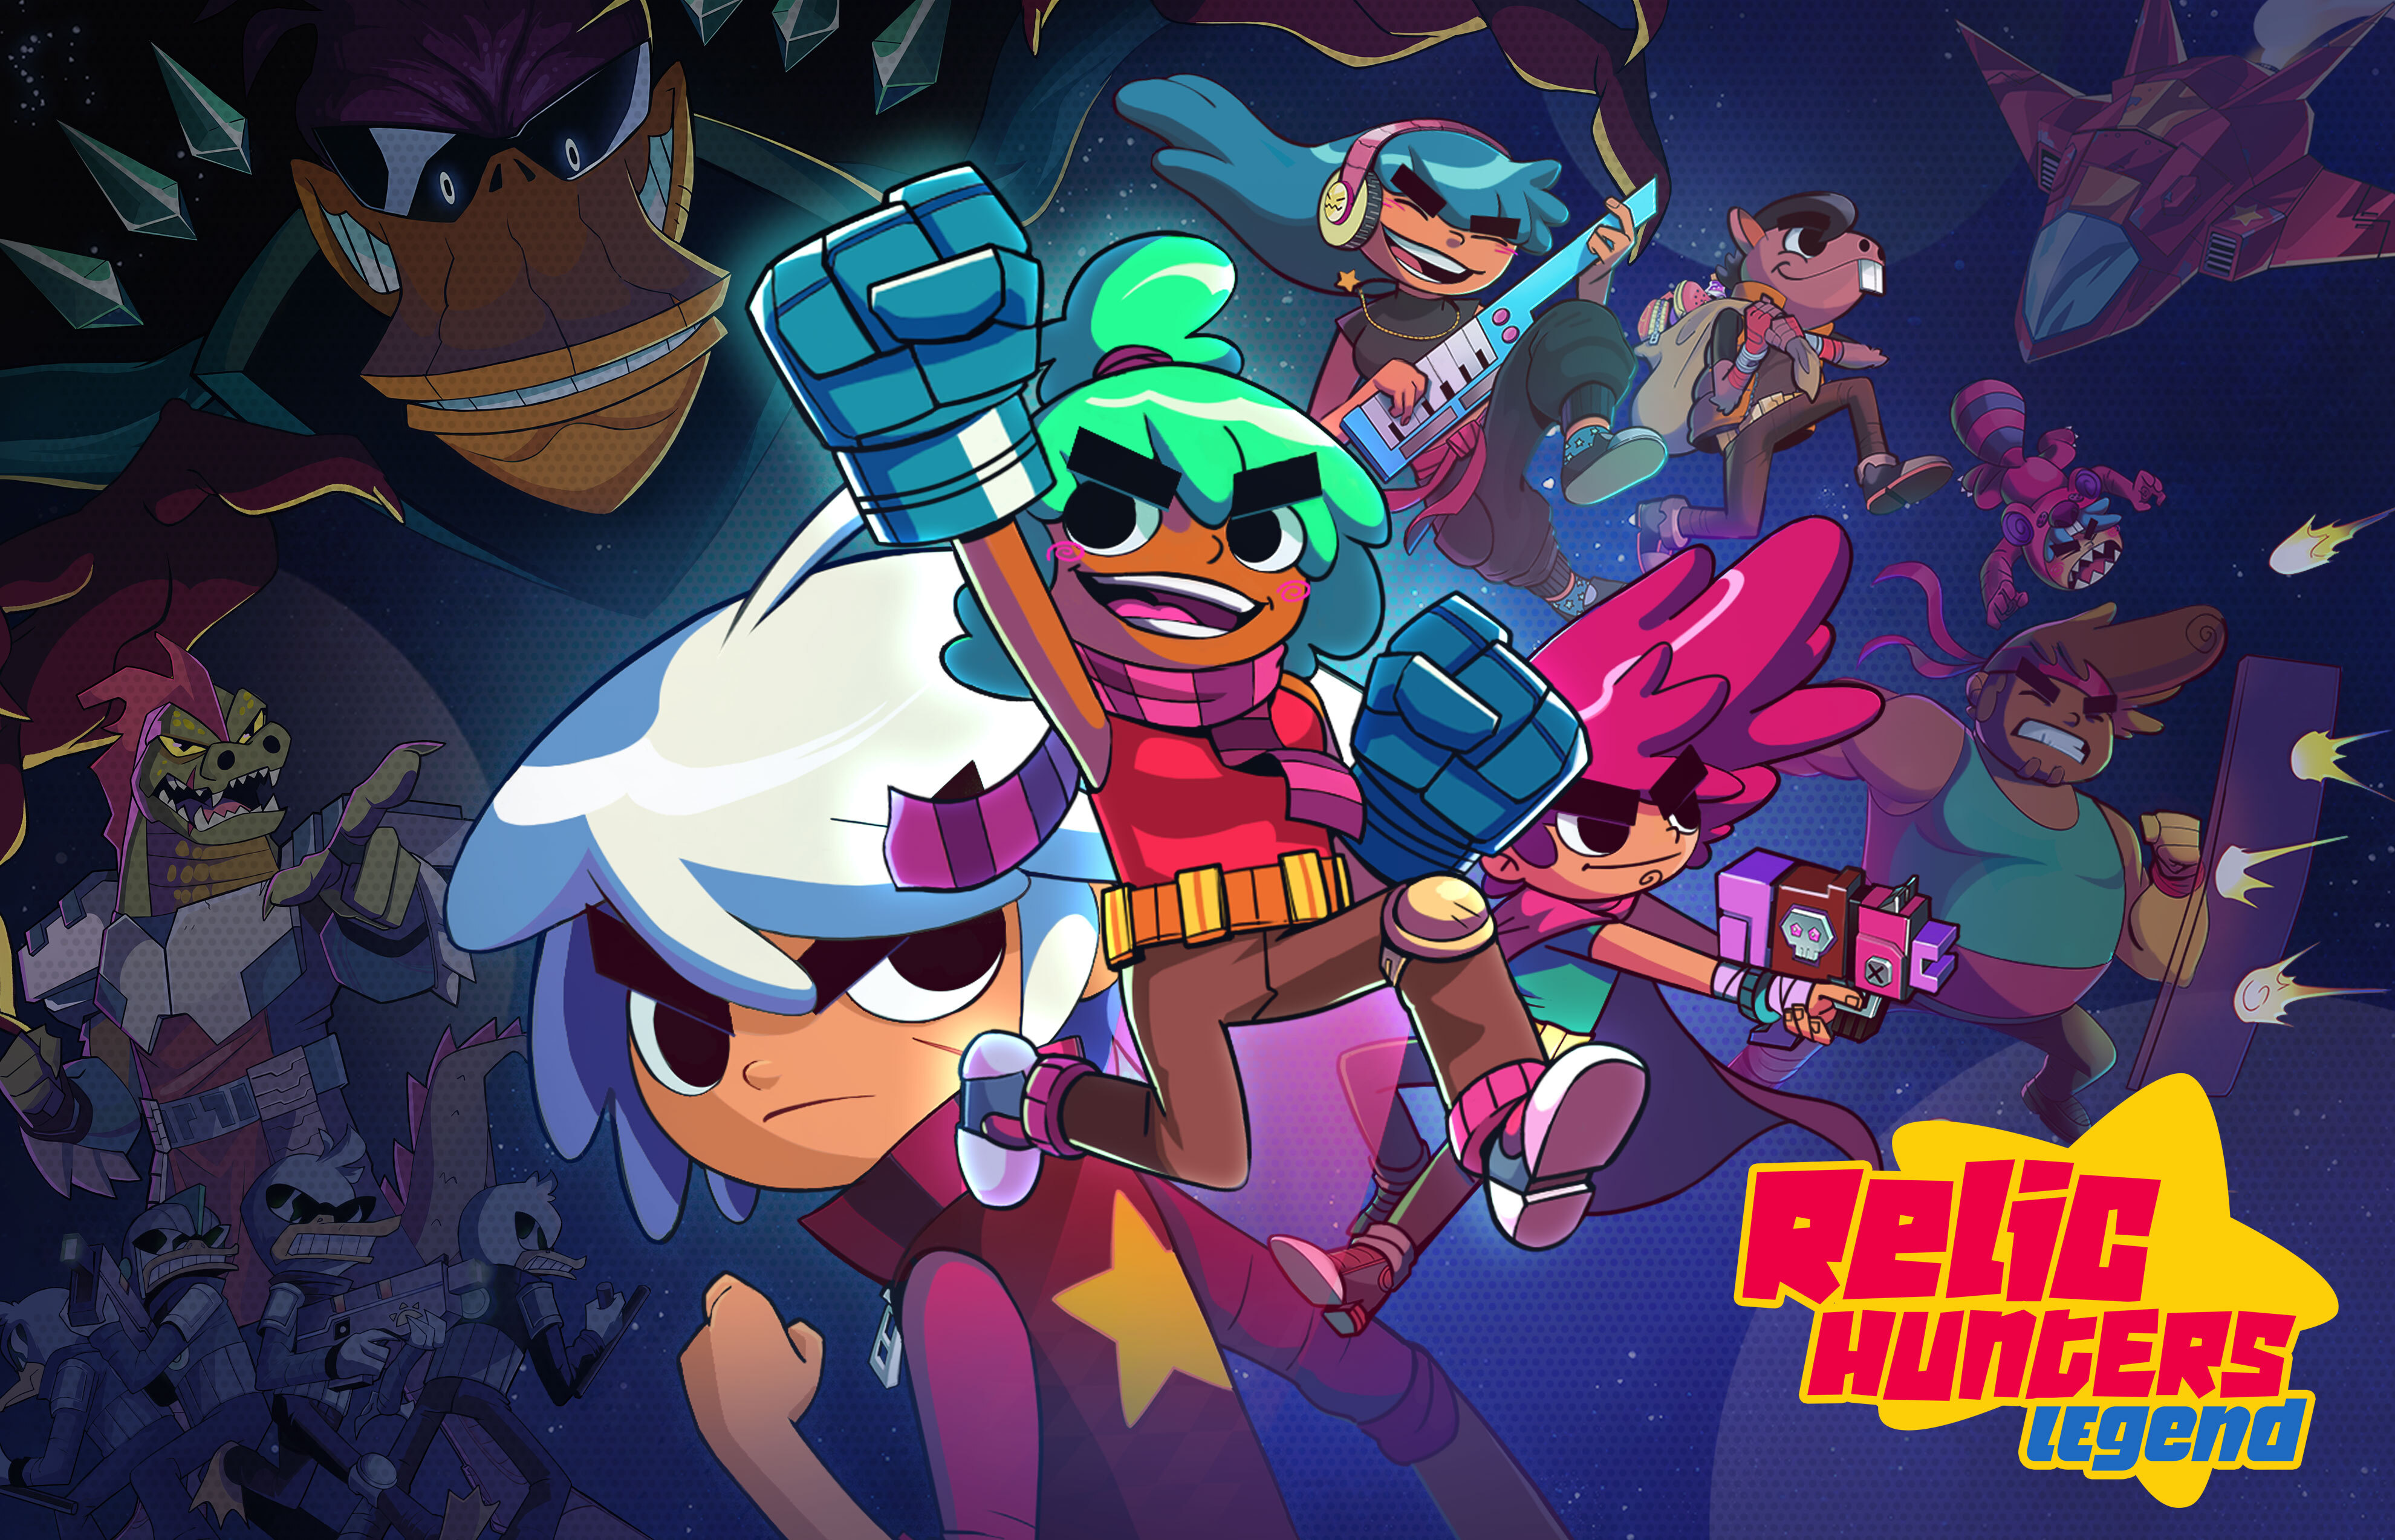 How Relic Hunters Legend grew from its F2P mobile roots into a 90s